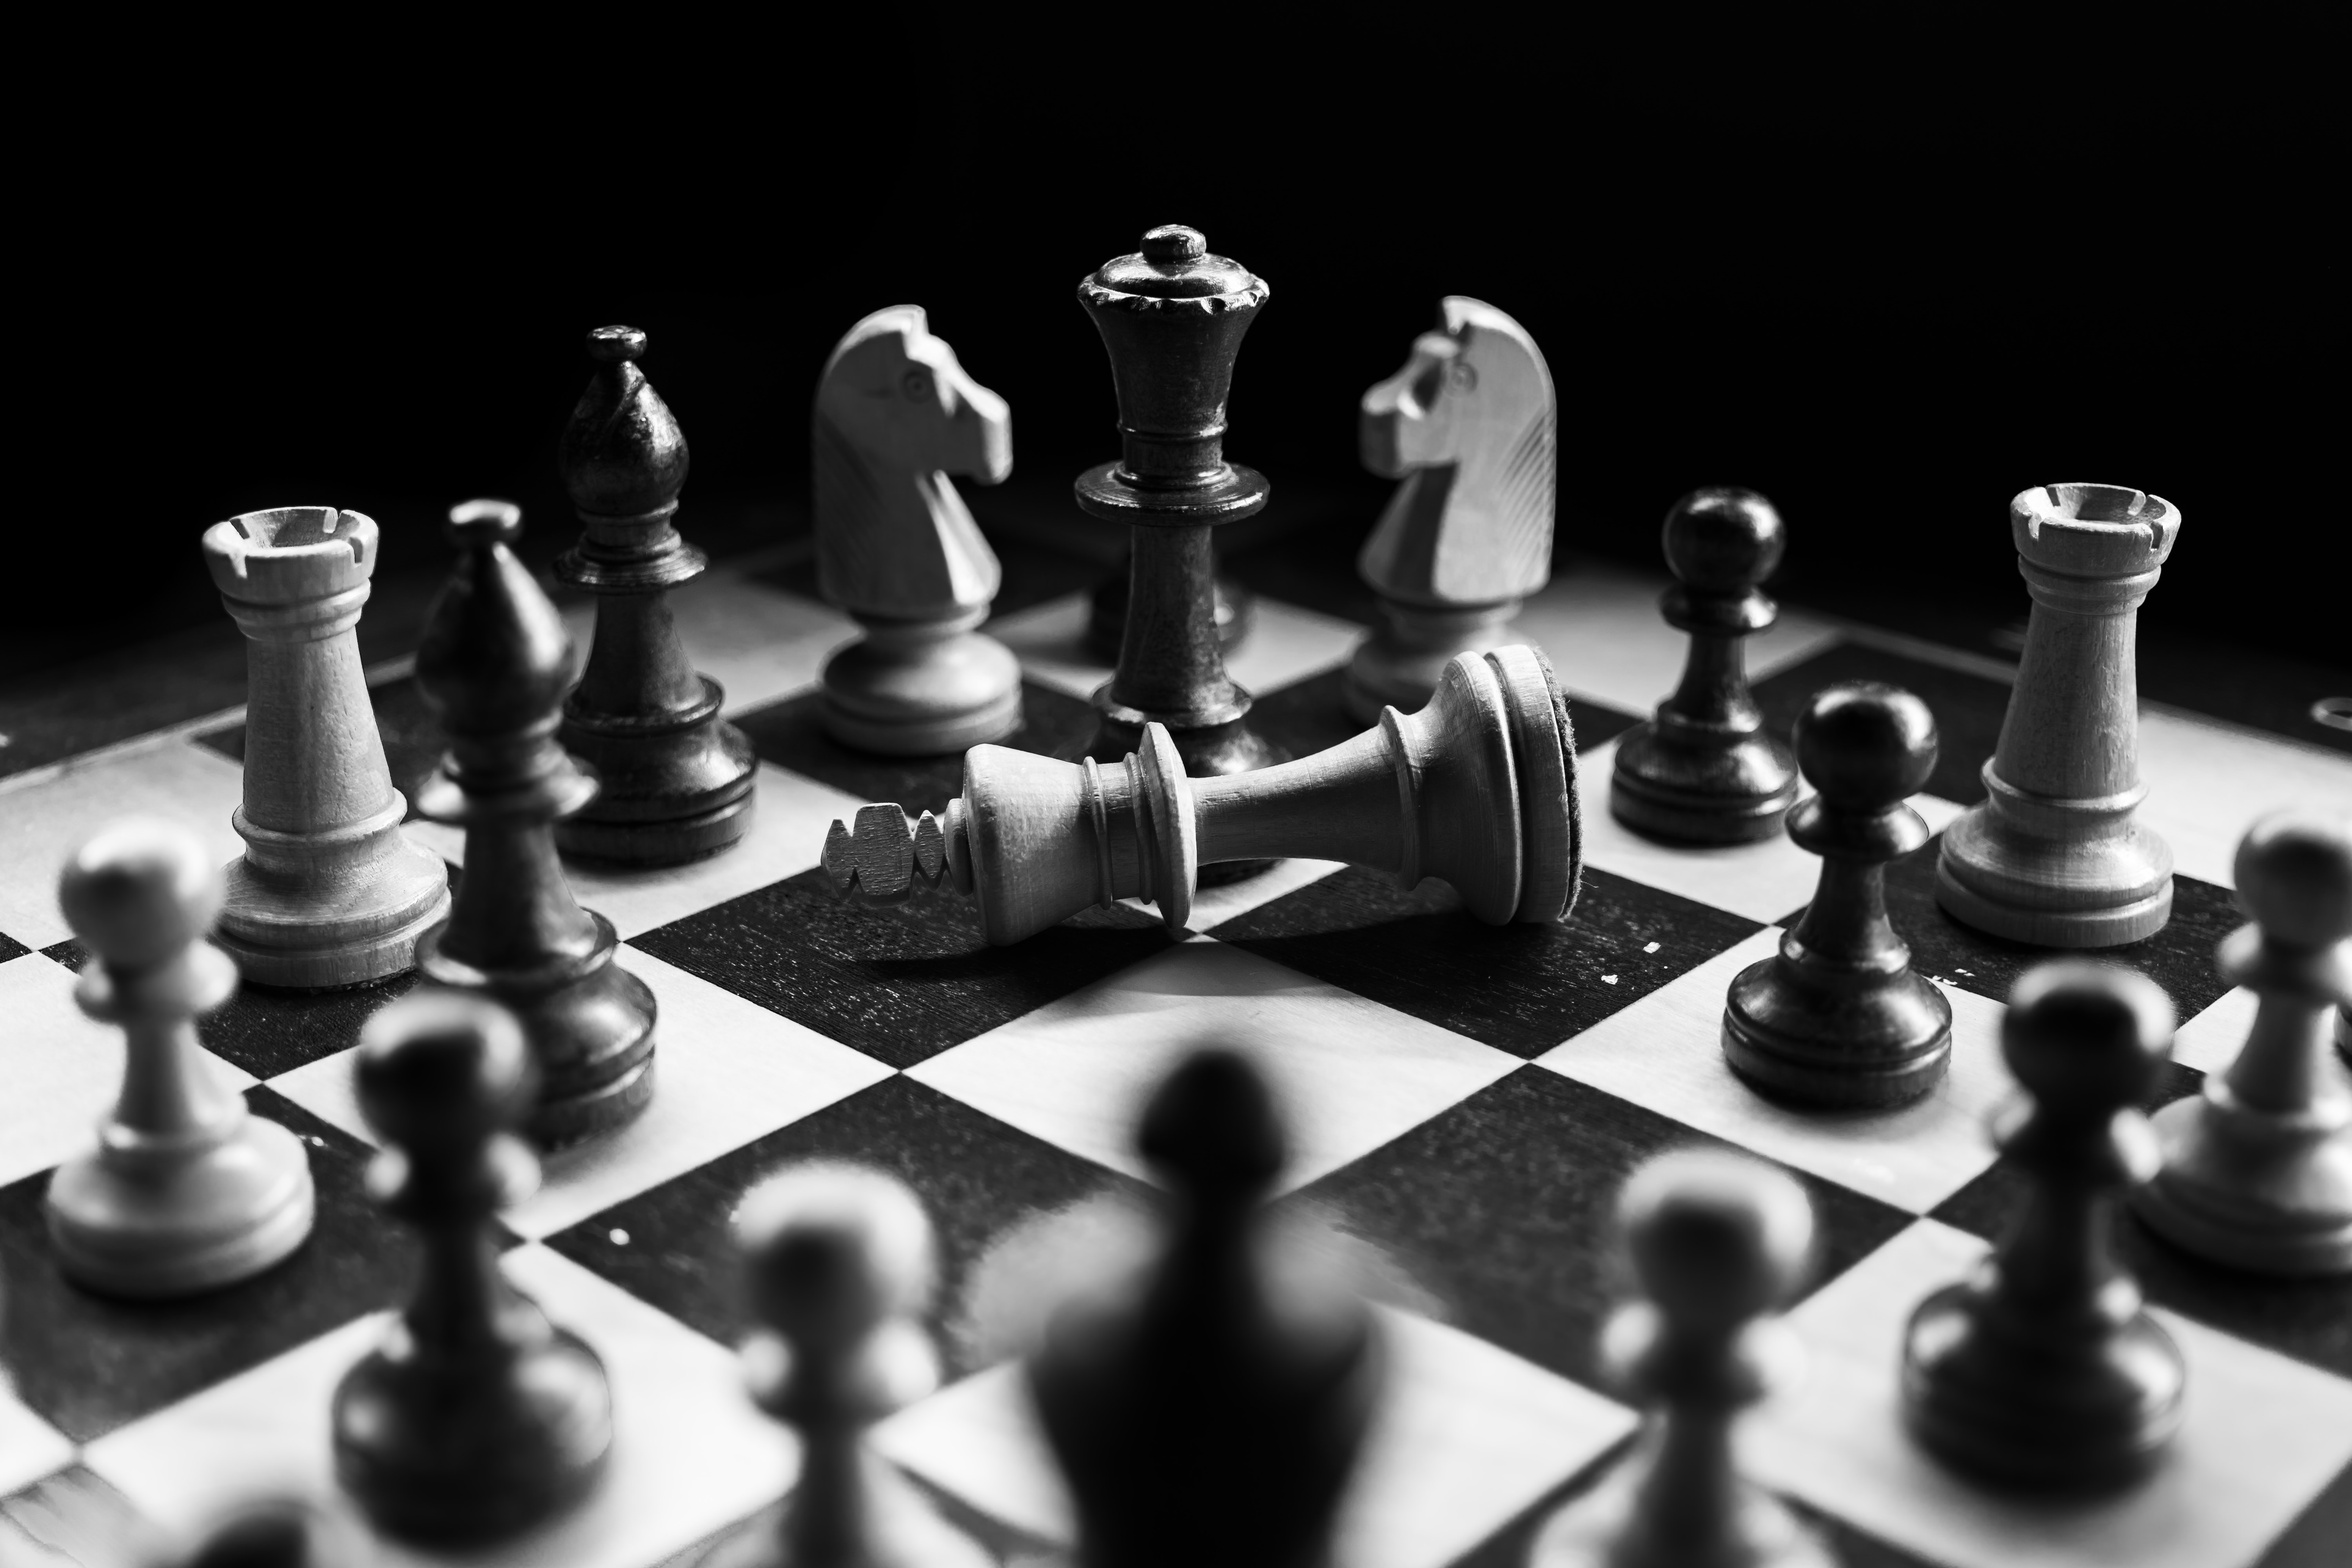 Both Dylan and Lacey loved chess | Photo: Unsplash